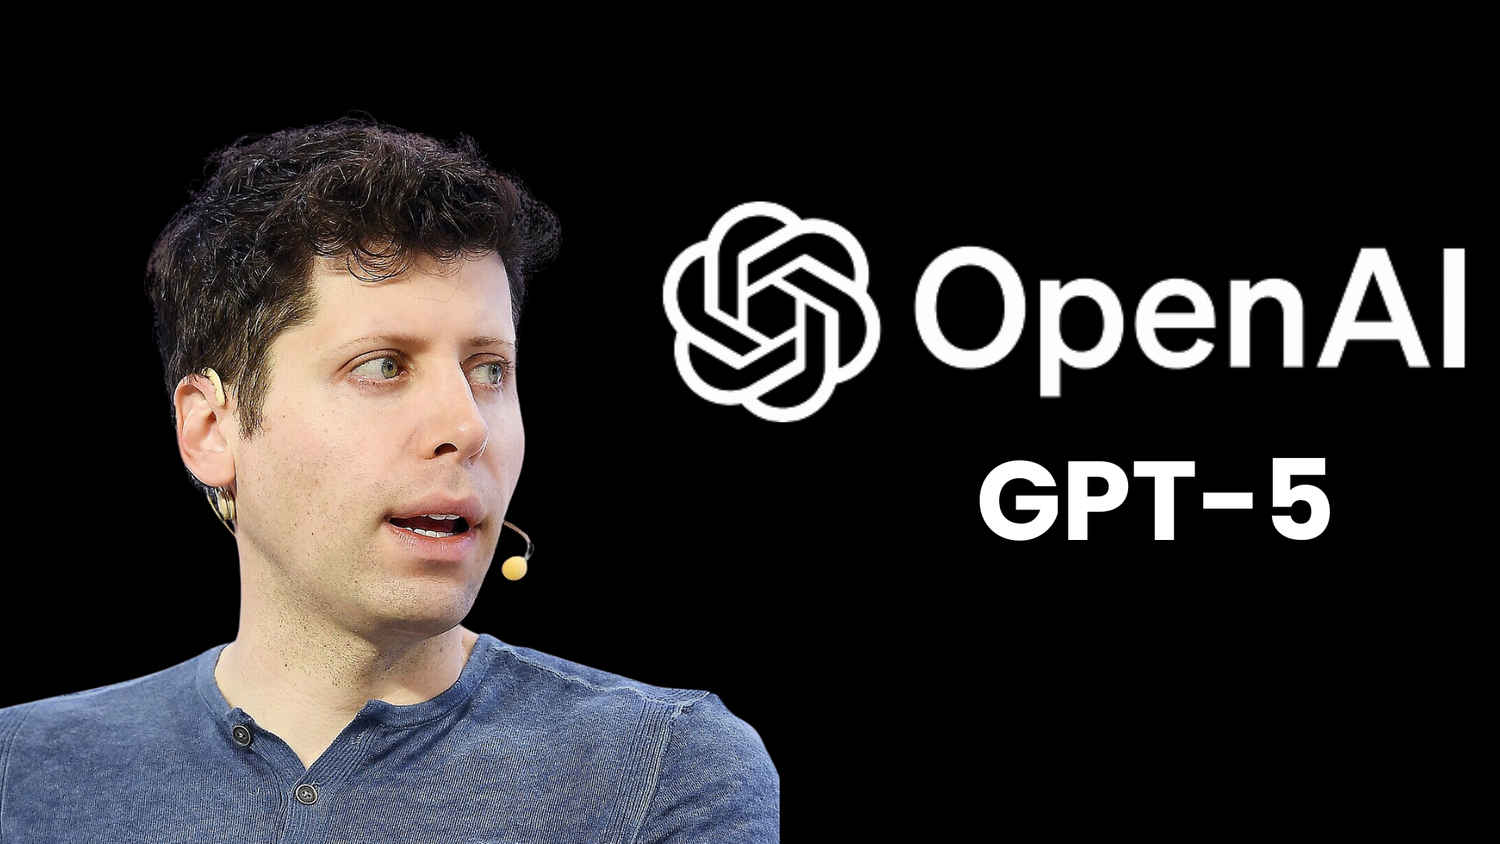 OpenAI’s GPT-5 will be a major upgrade over GPT-4, says Sam Altman